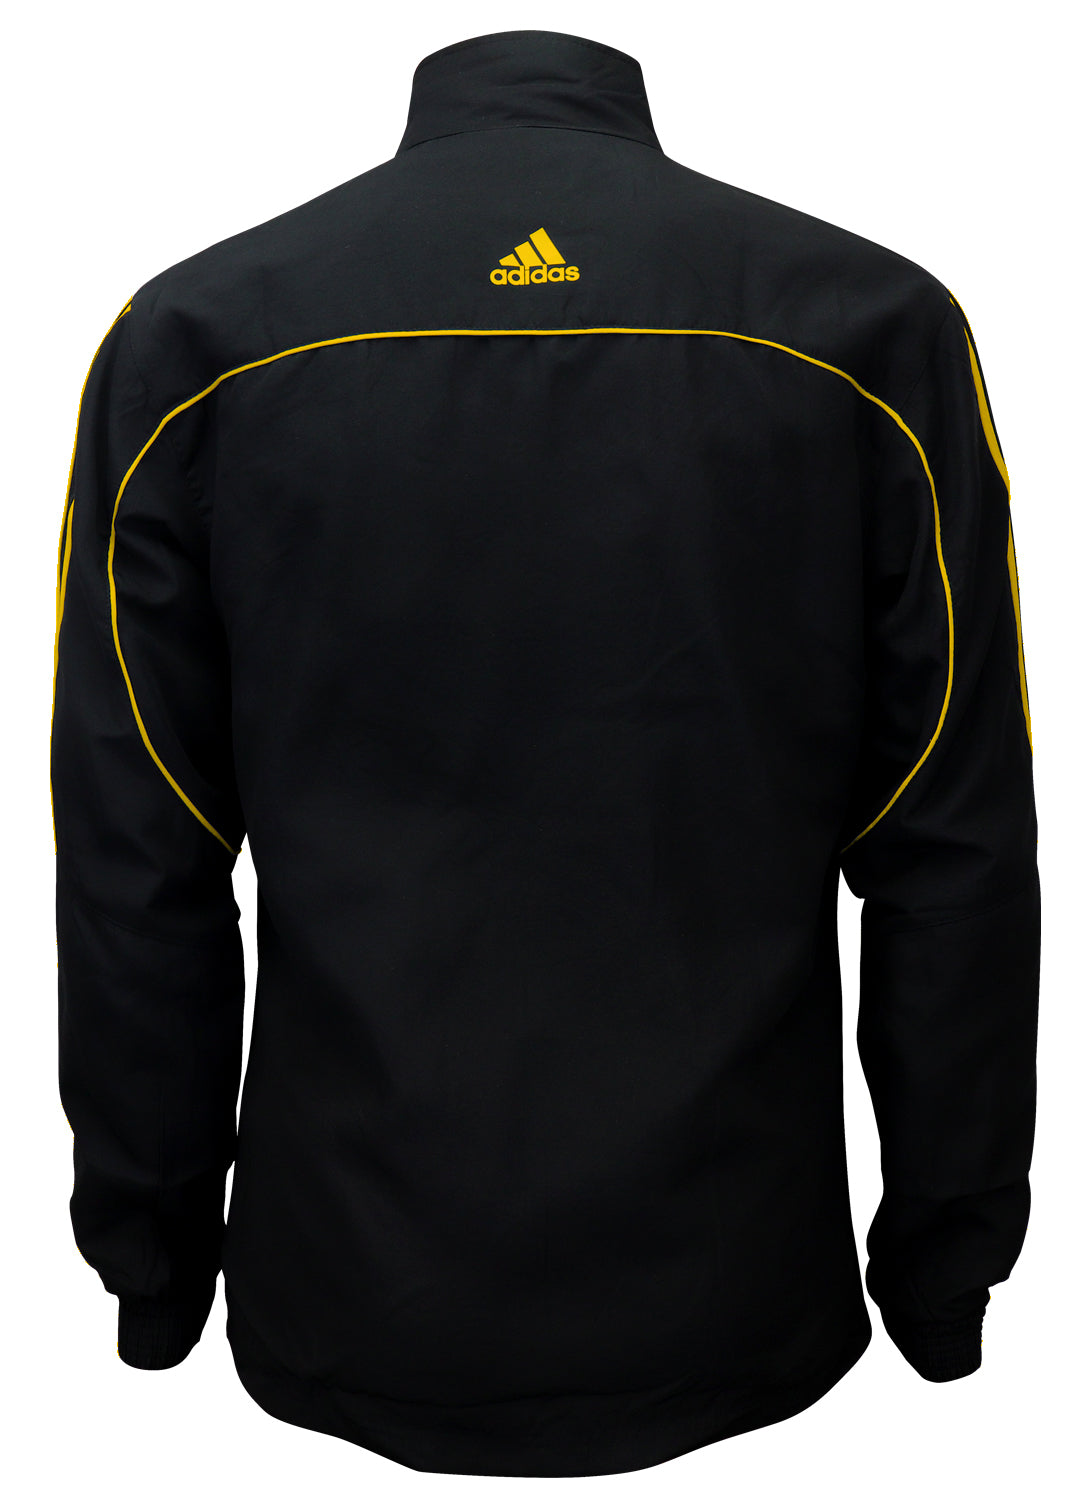 adidas Black with Gold Stripes Windbreaker Style Team Jacket Back View